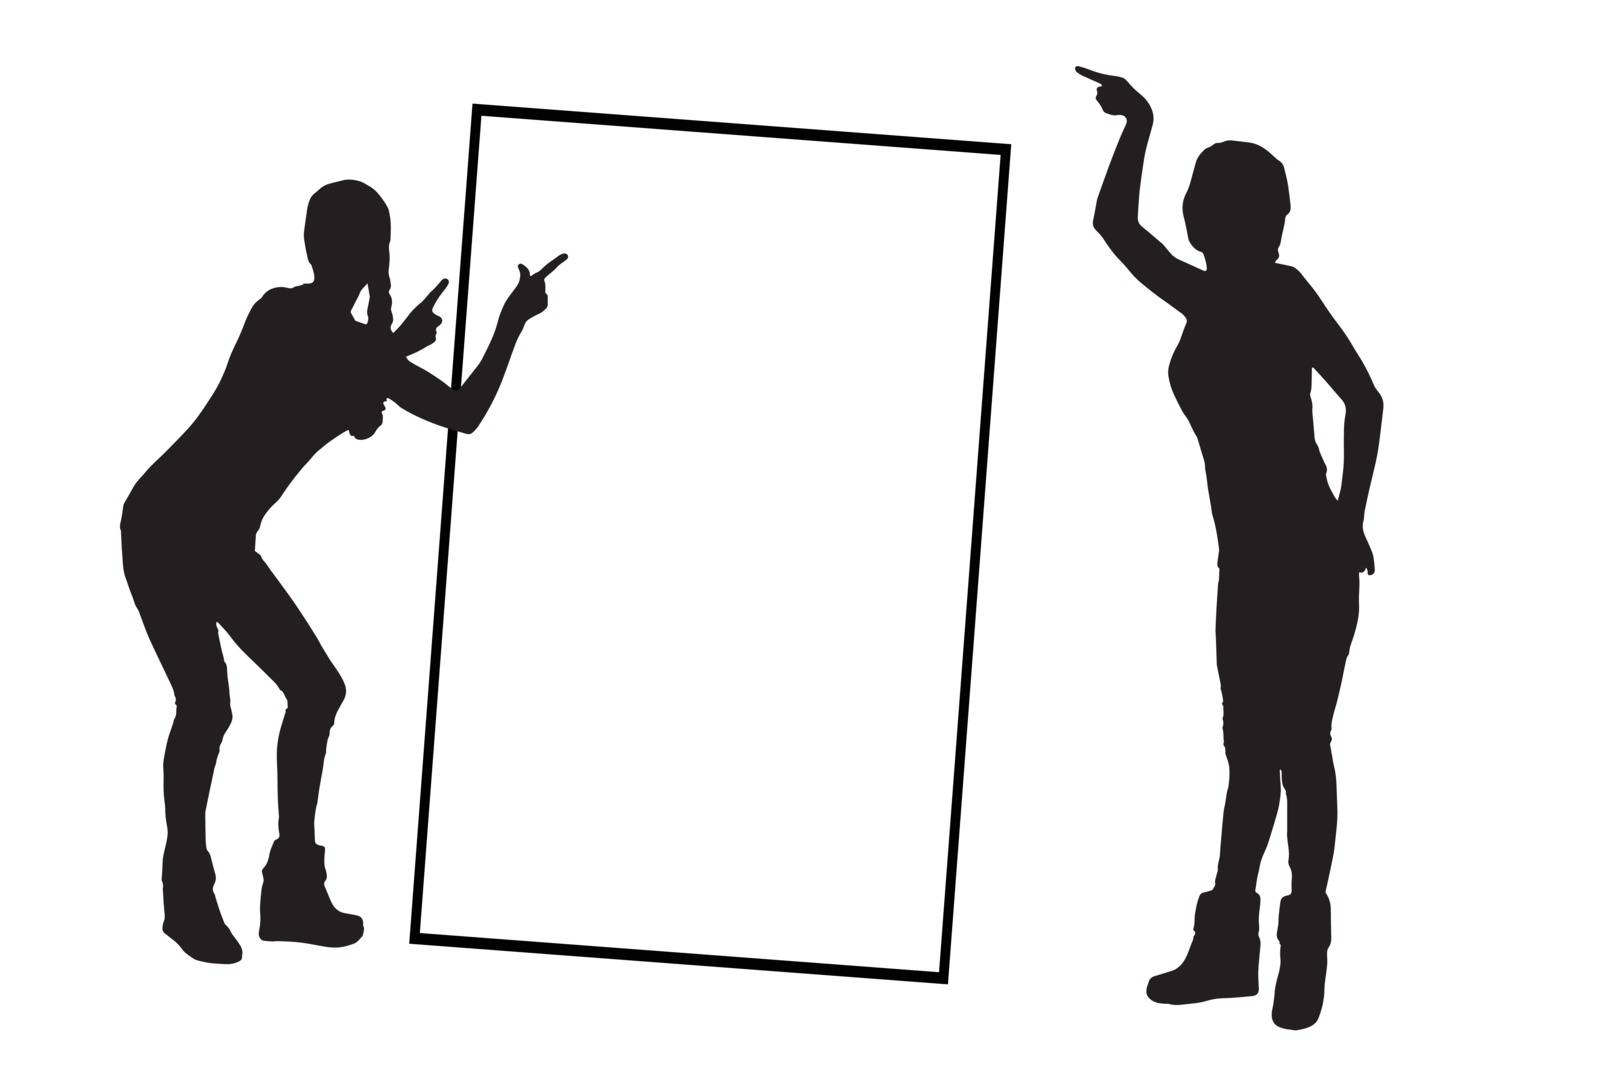 A frame with a place under the text monochrome. Girl on white background with frame silhouette pointing with hands. Illustration, vector for your design